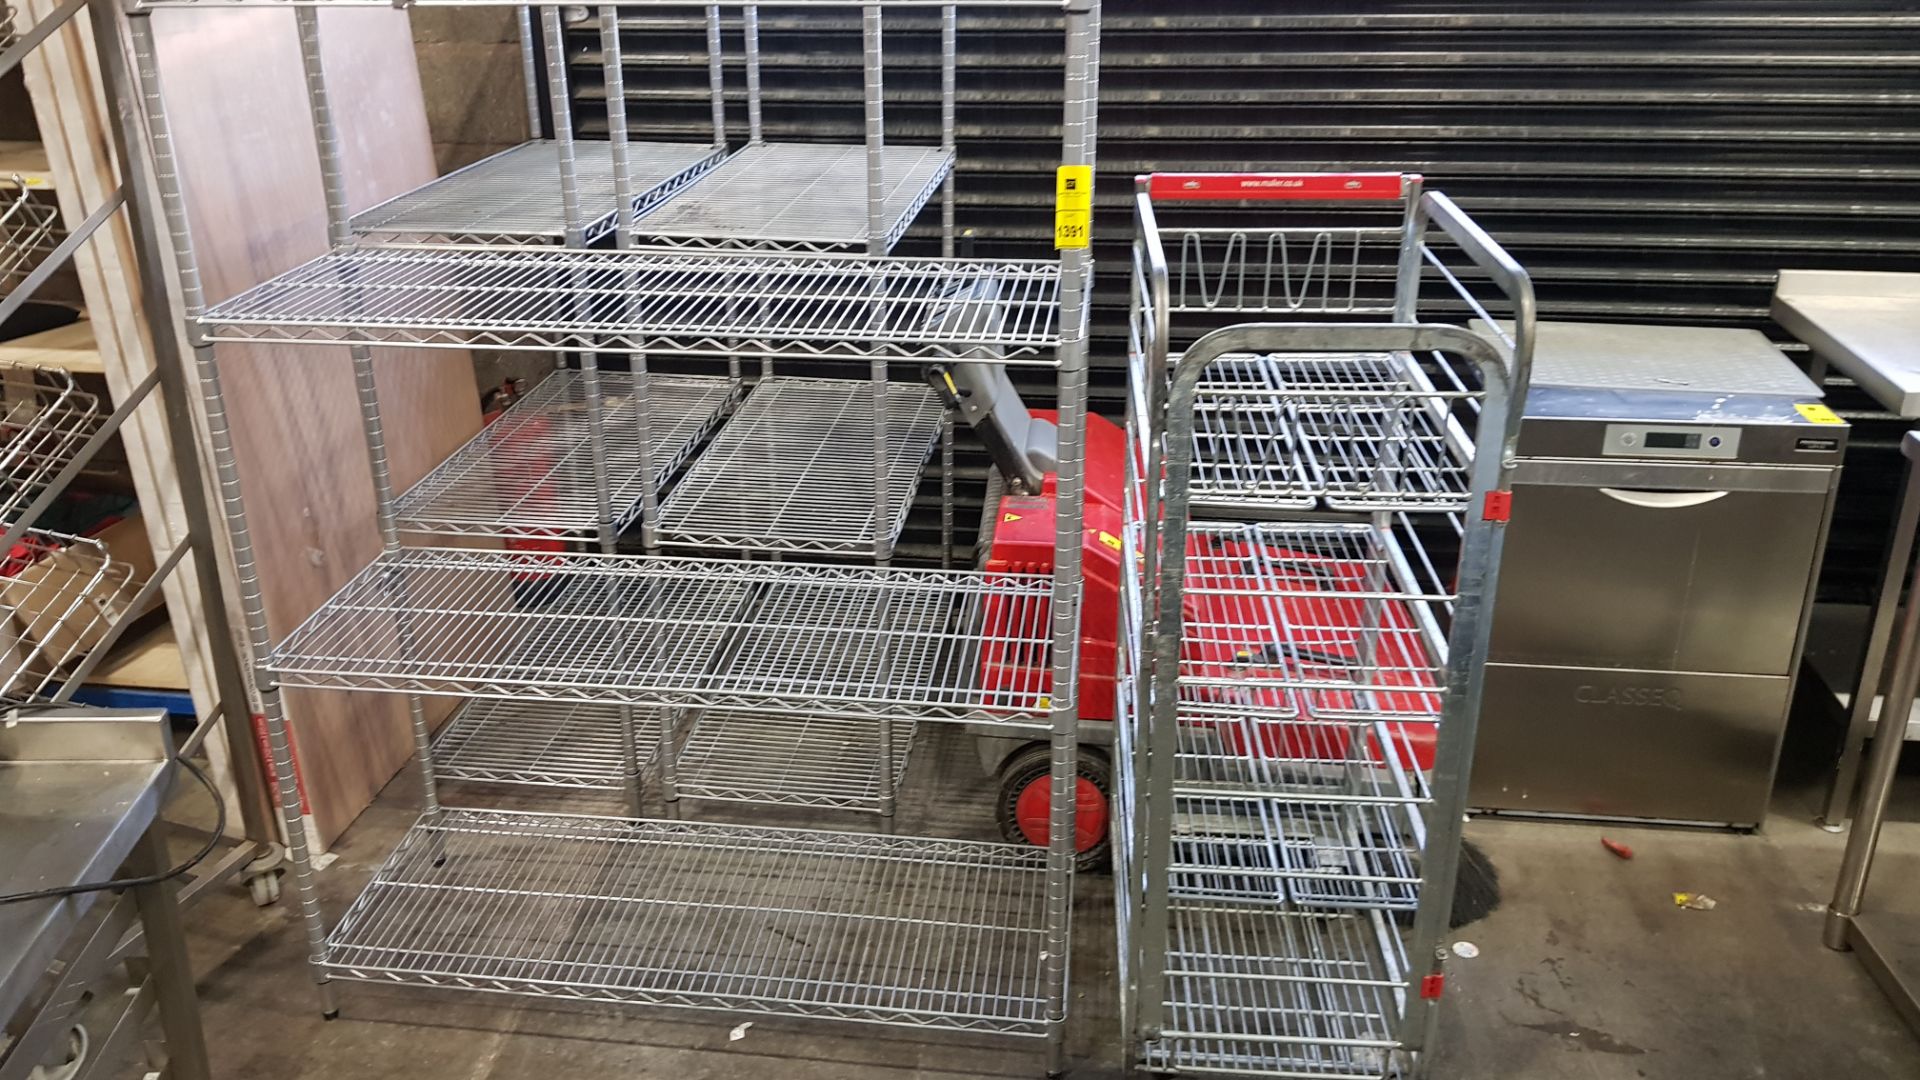 3 X 4-SHELF STANDS WITH A STAINLESS STEEL TROLLEY